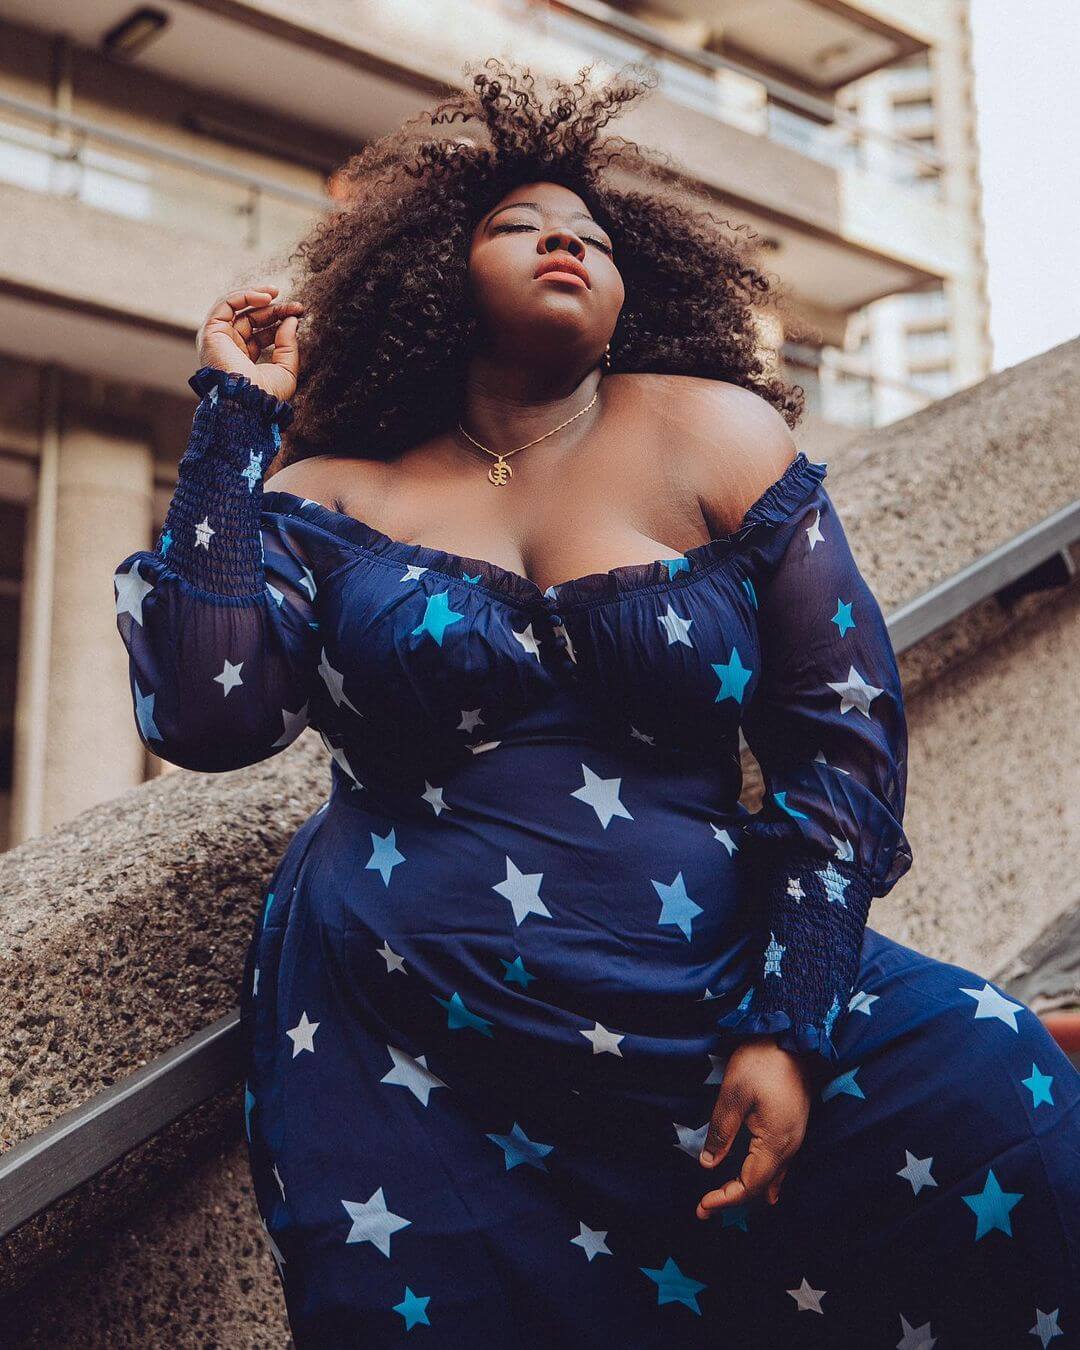 Why has sustainable fashion left plus size women out for so long?